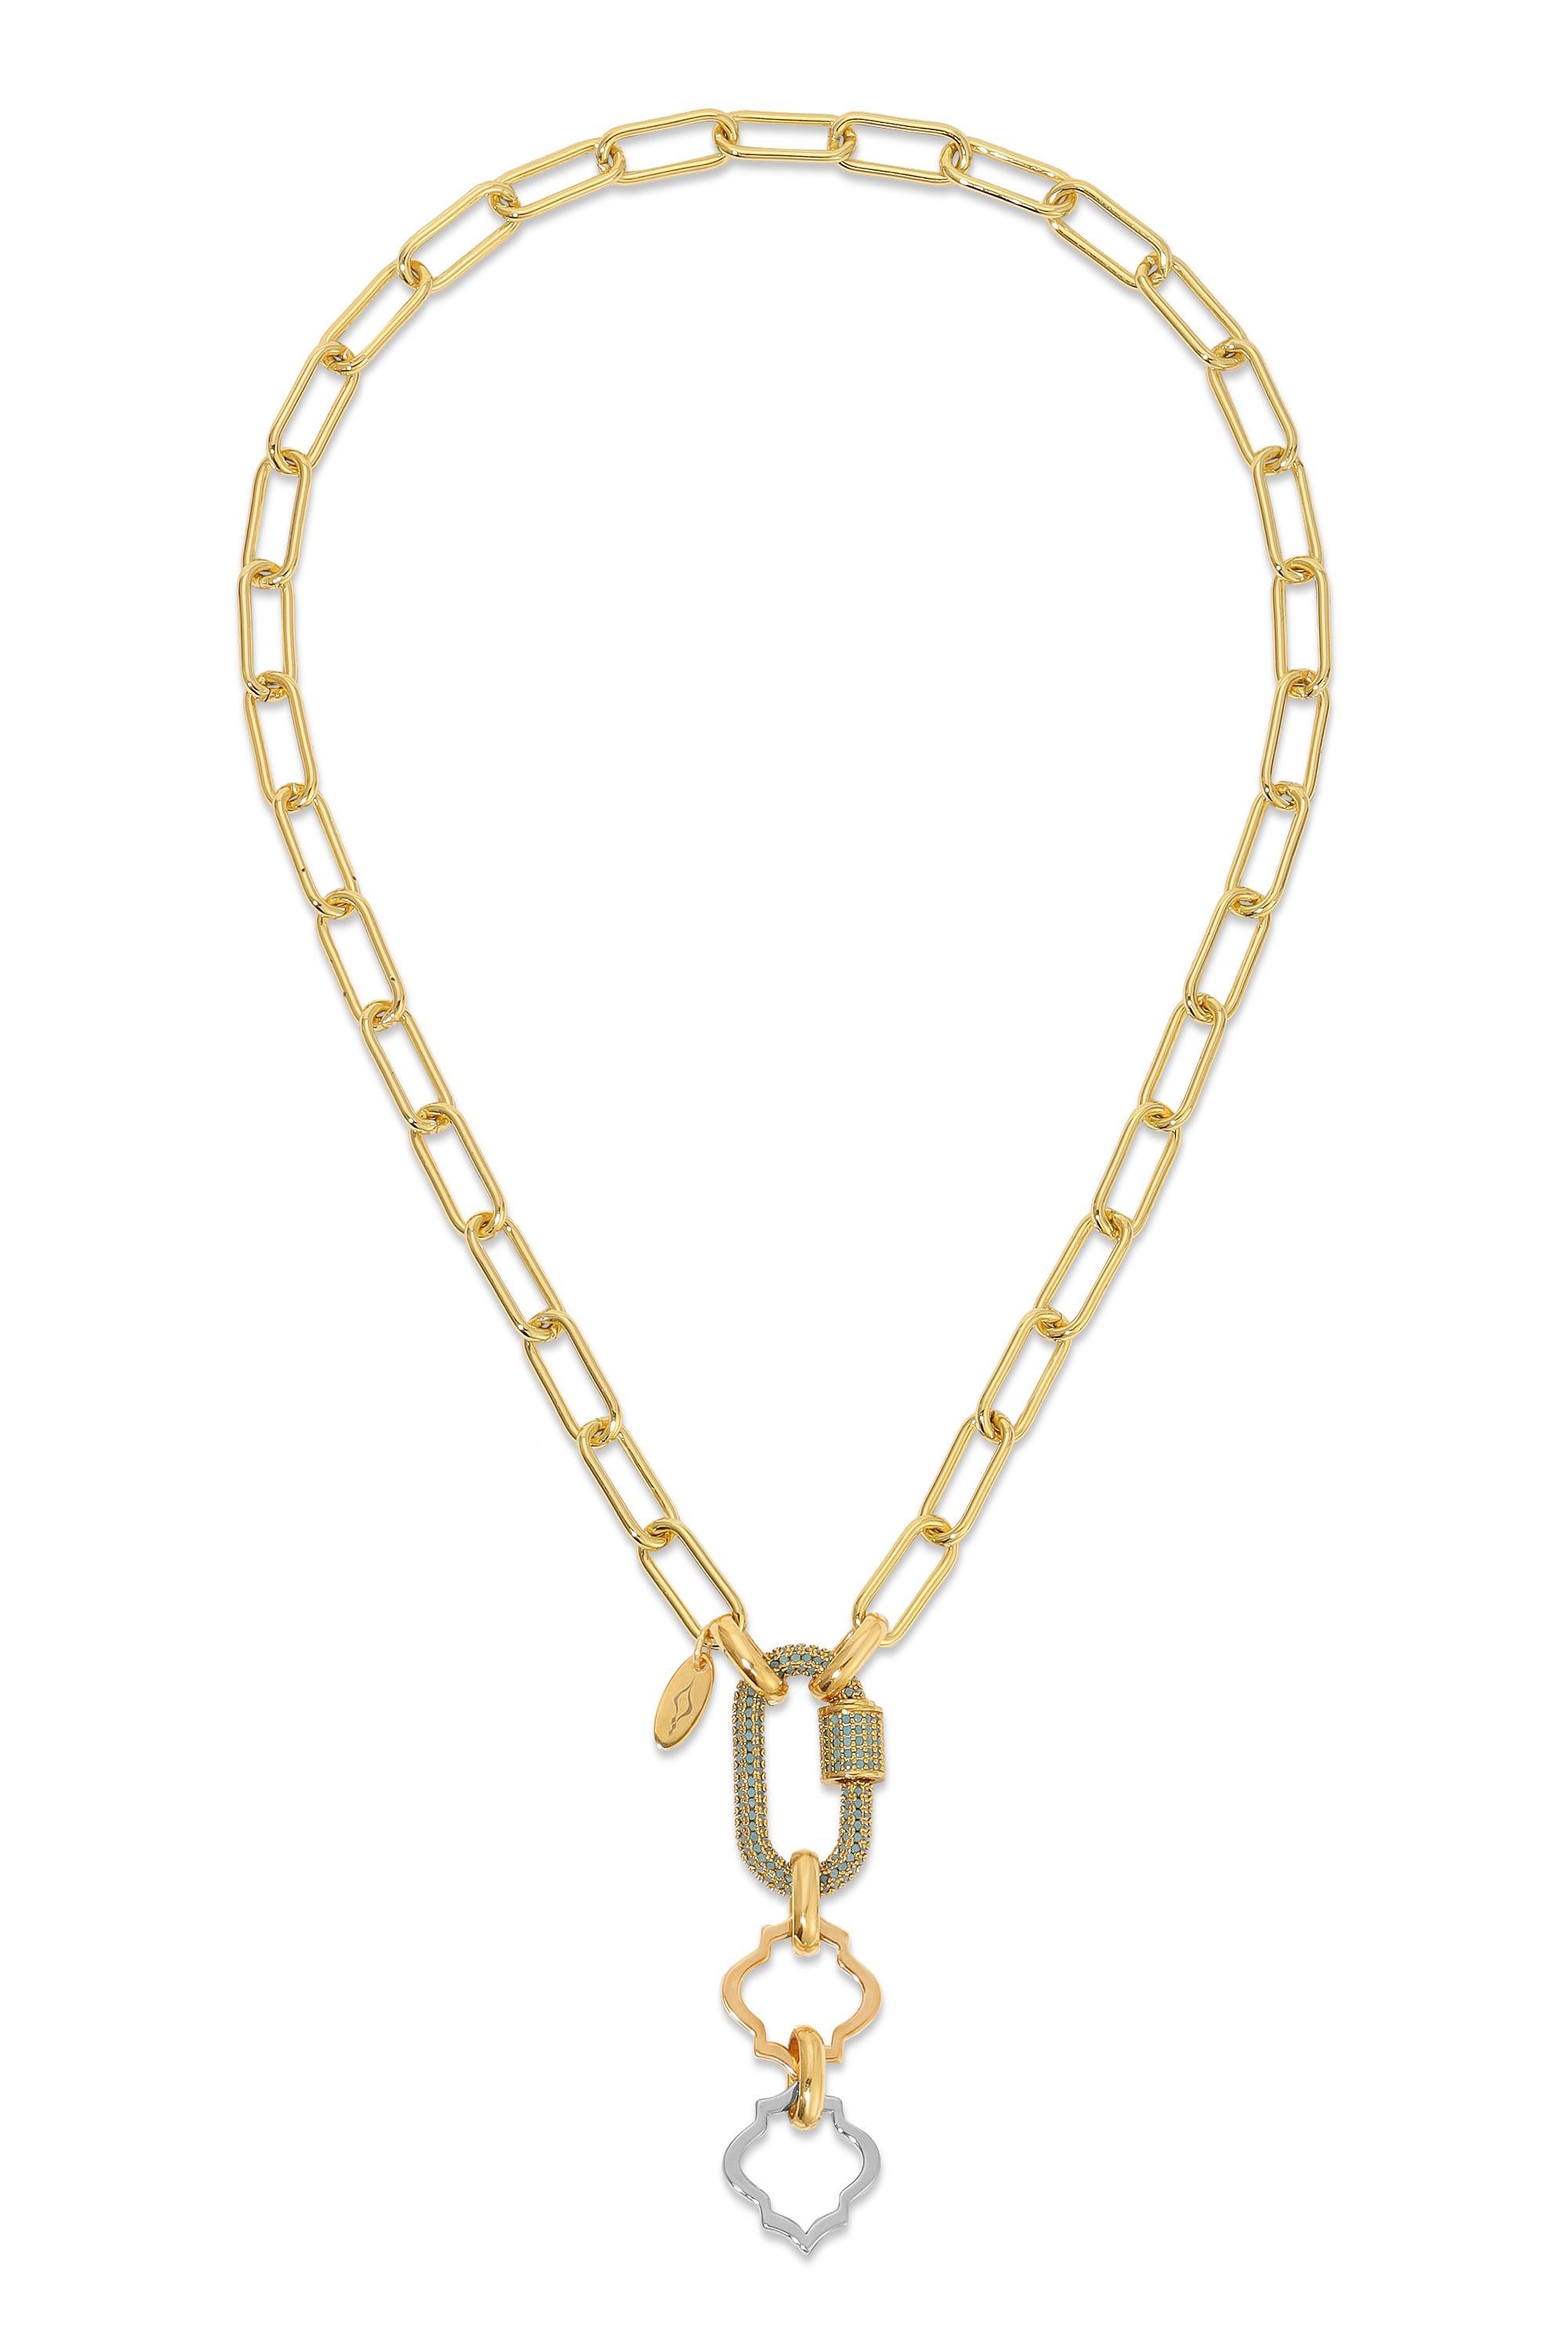 Women's or Men's Arnika Oval Chain Necklace For Sale